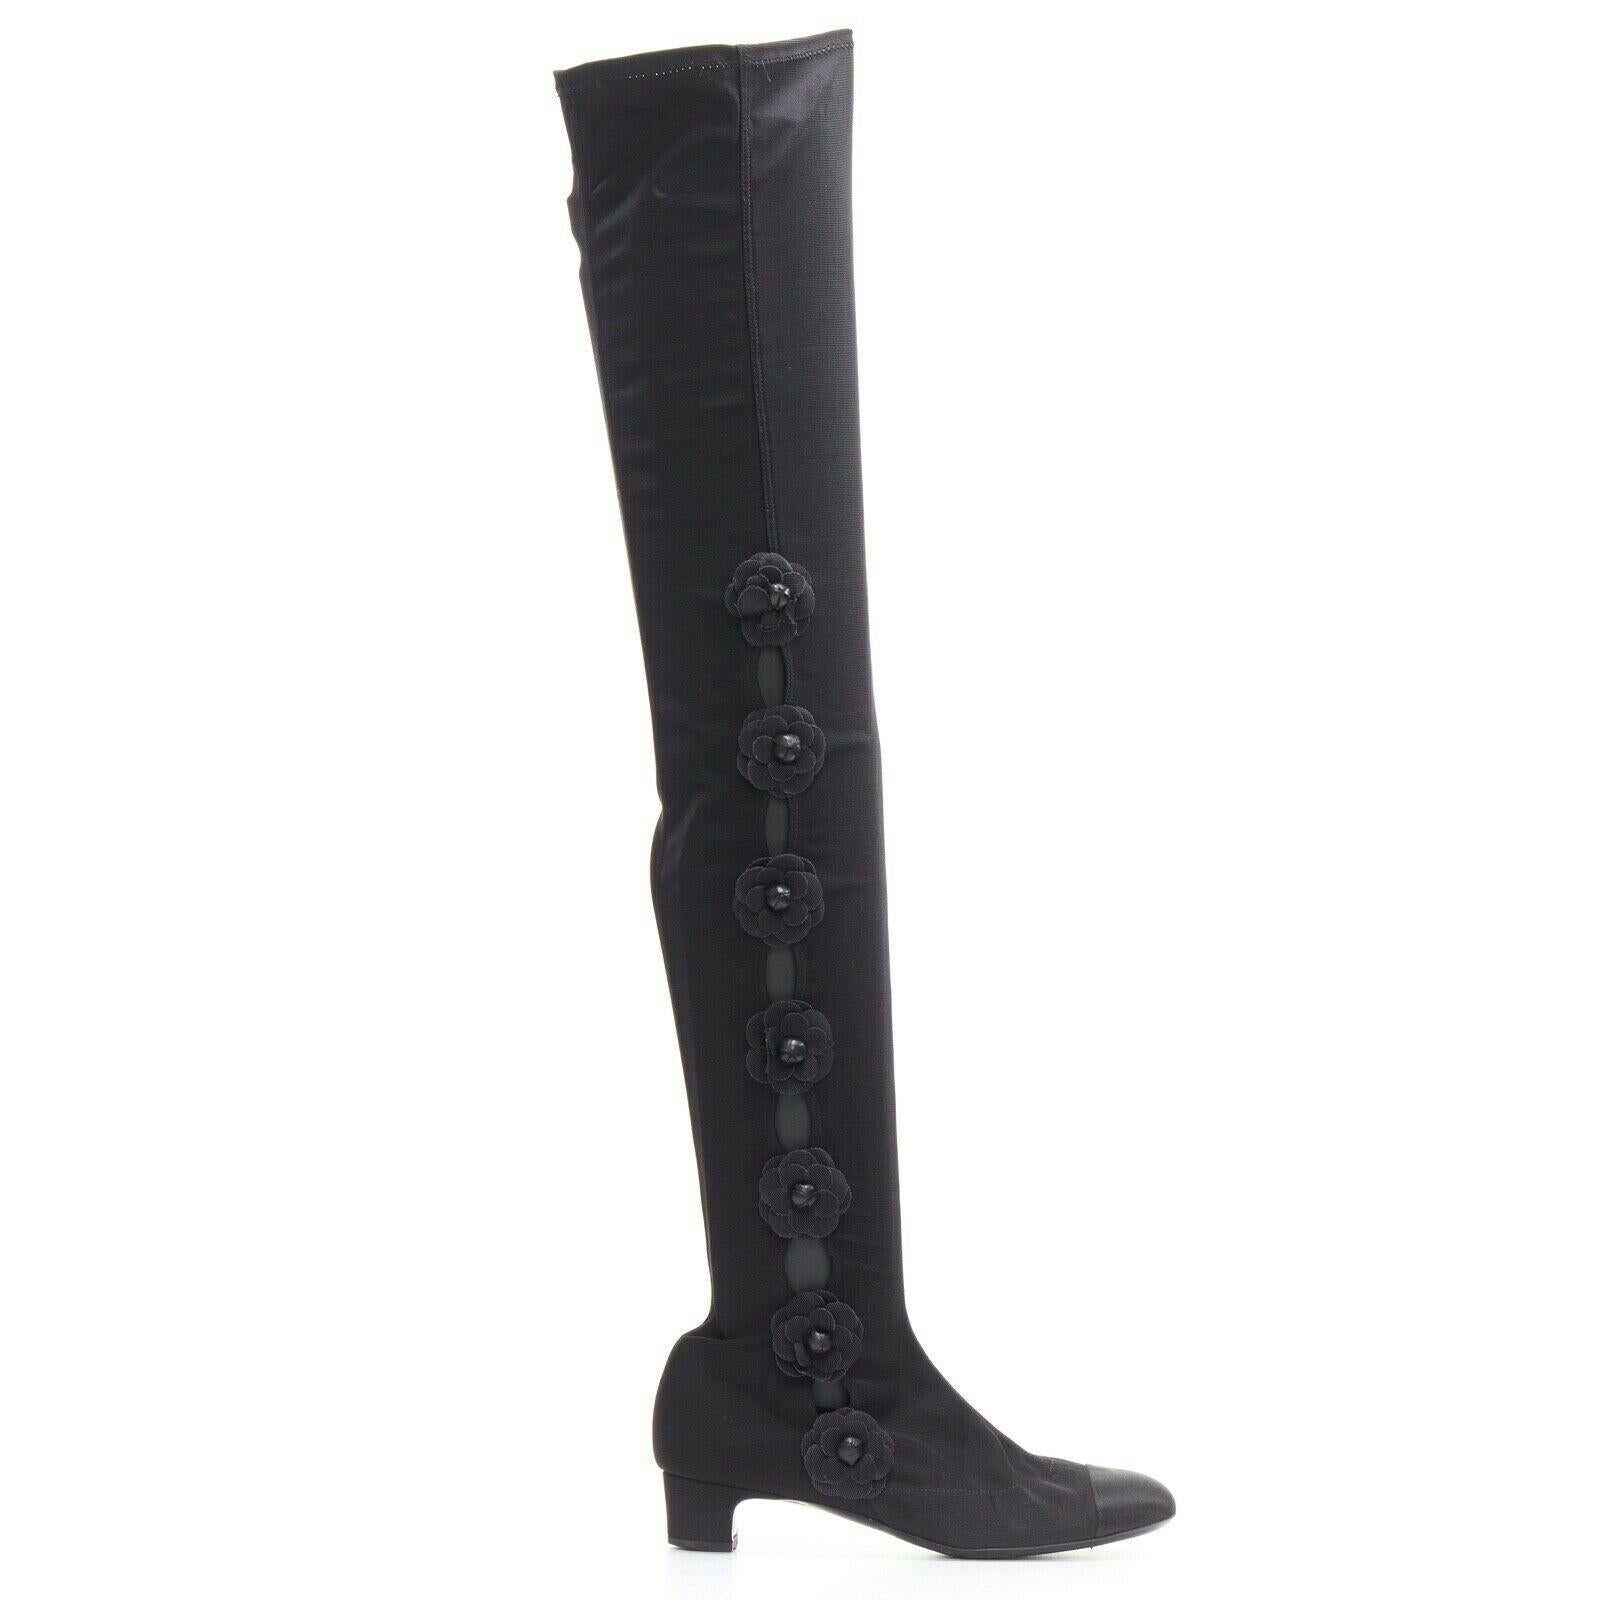 CHANEL black Camellia applique satin toe cap stretch fit flat knee boots EU38.5

CHANELBlack stretch fabric upper. Satin toe cap. Tonal stitching. Signature Camellia leather bud floral applique. Block short heel. Stretch fit. Knee high boot. Made in